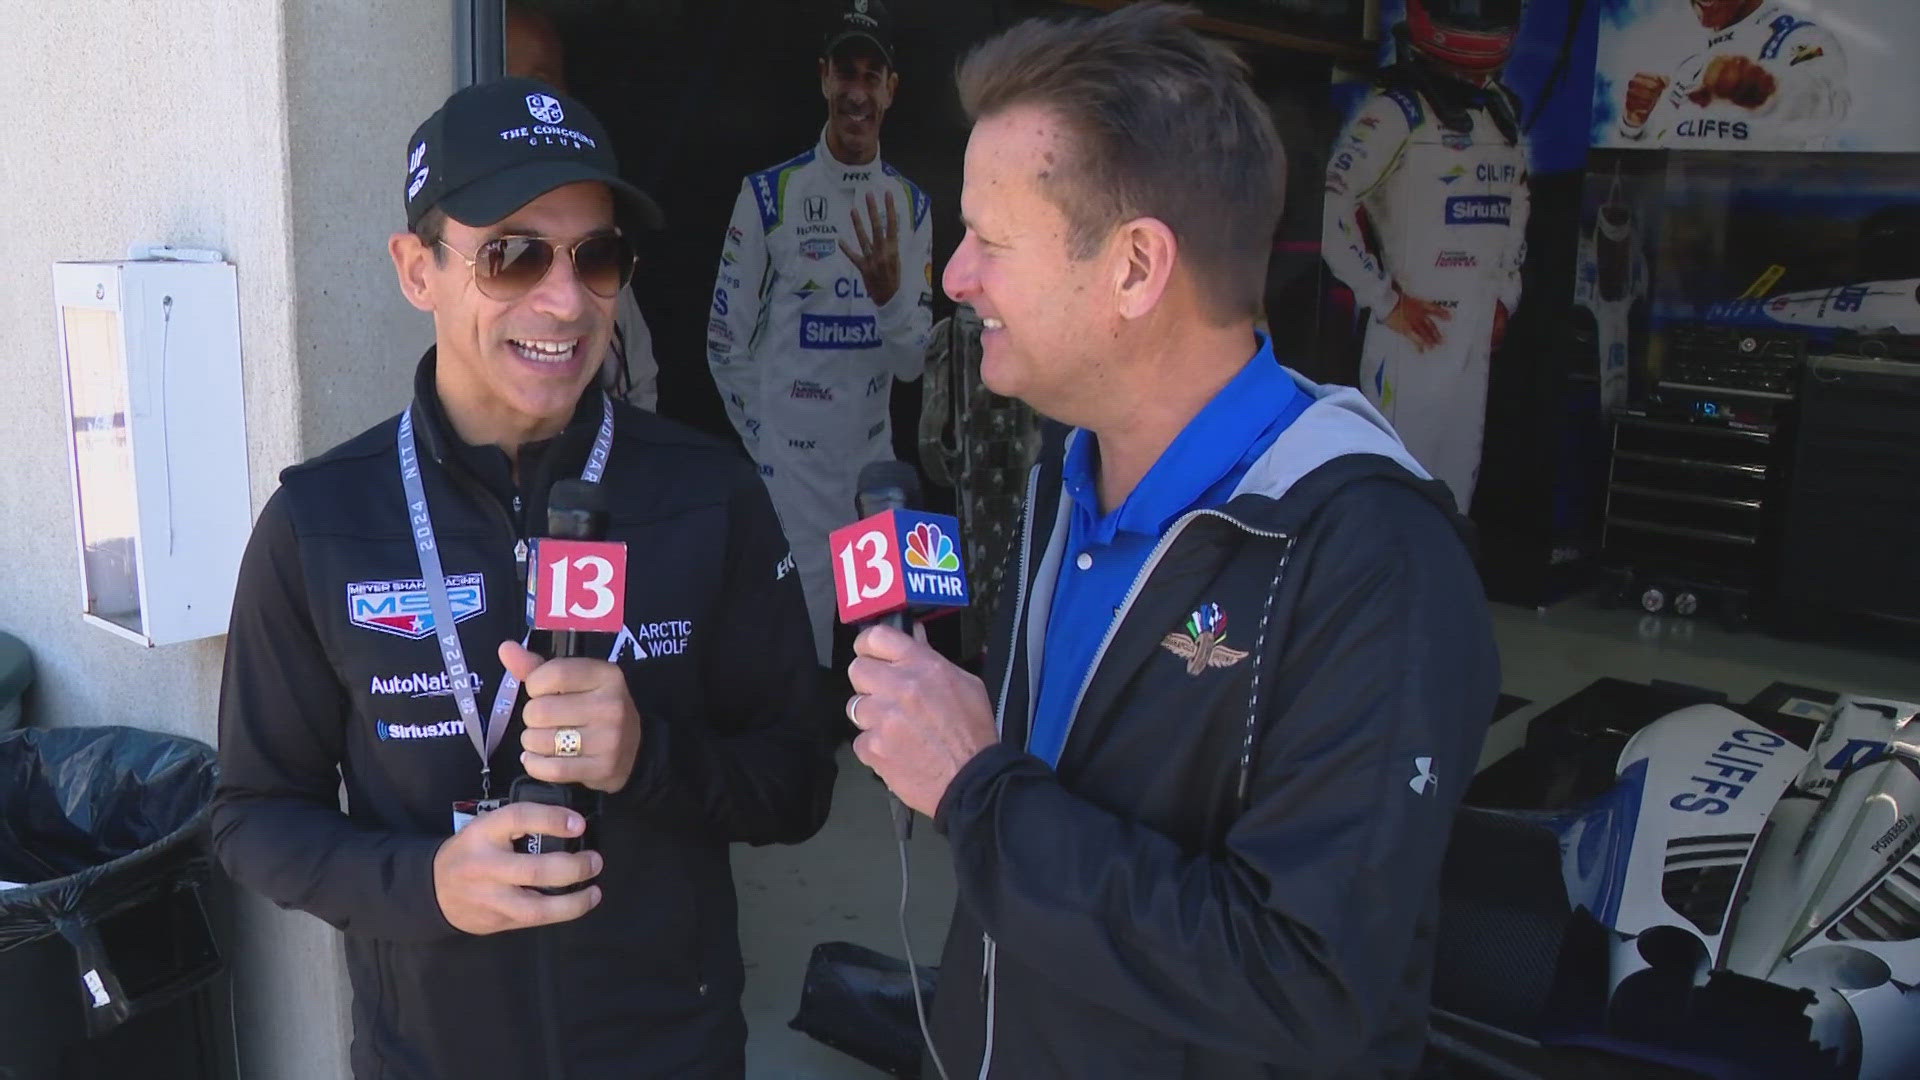 13Sports director Dave Calabro talks with 4-time Indianapolis 500 winner Helio Castroneves at the Sonsio Grand Prix at the Indianapolis Motor Speedway road course.